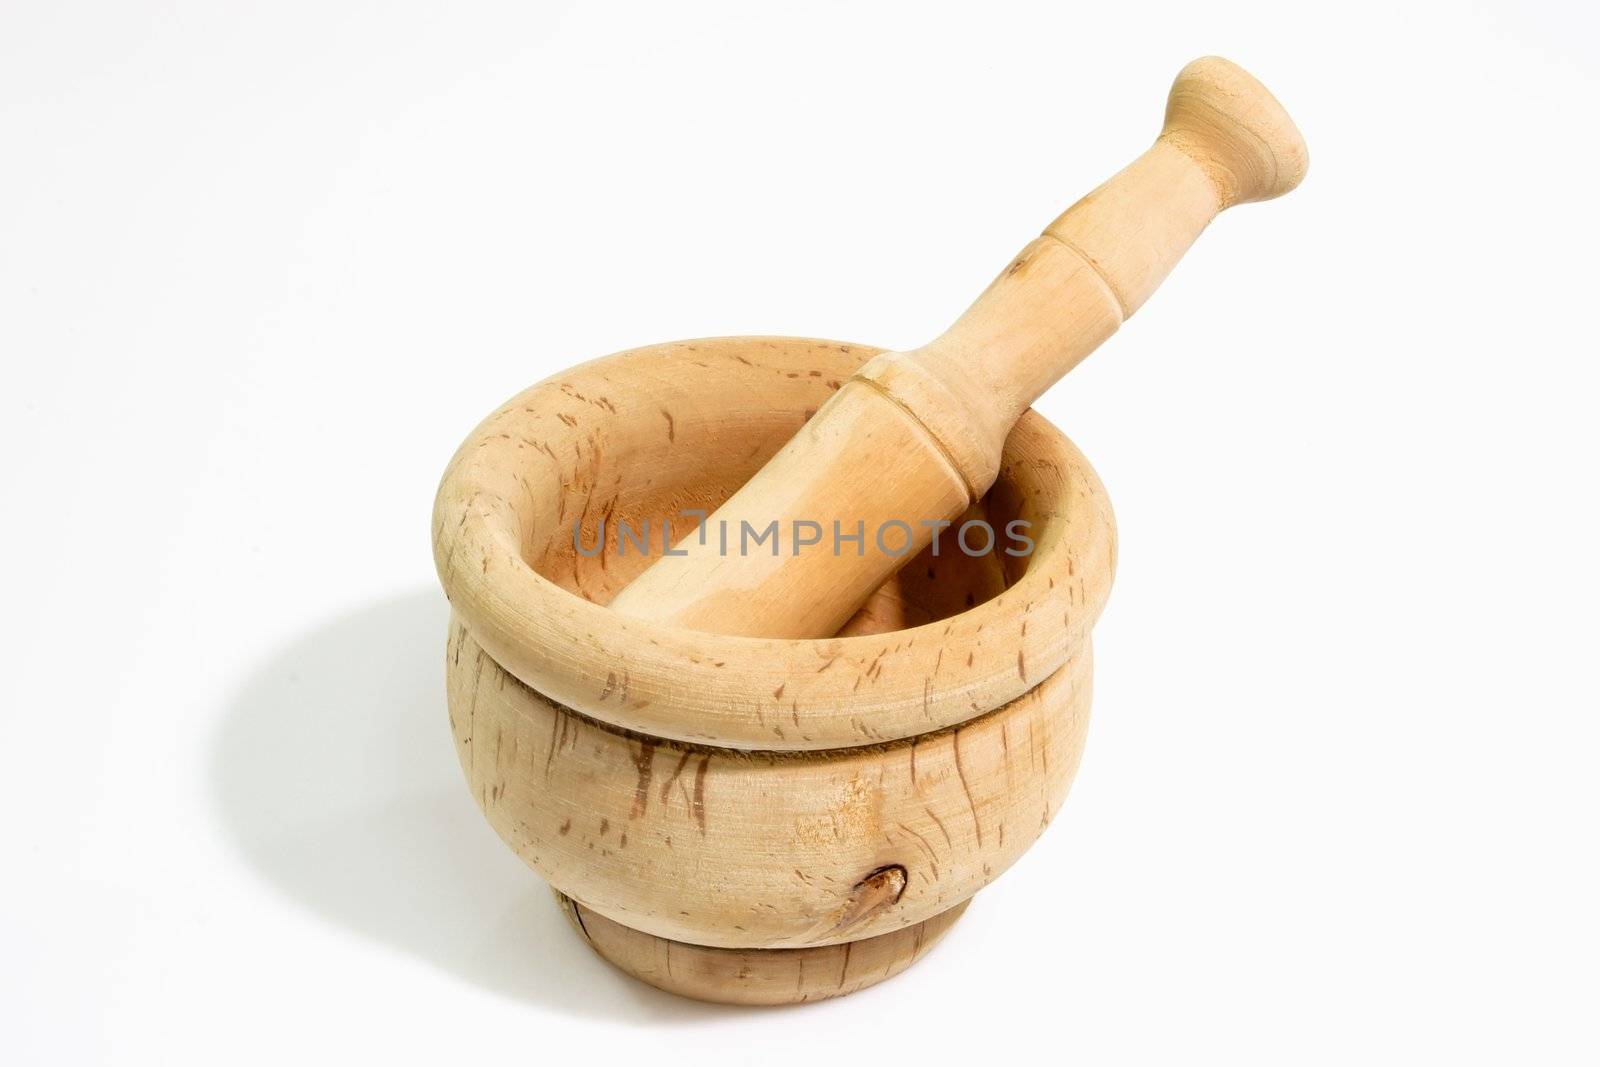 Mortar and Pestle by Teamarbeit